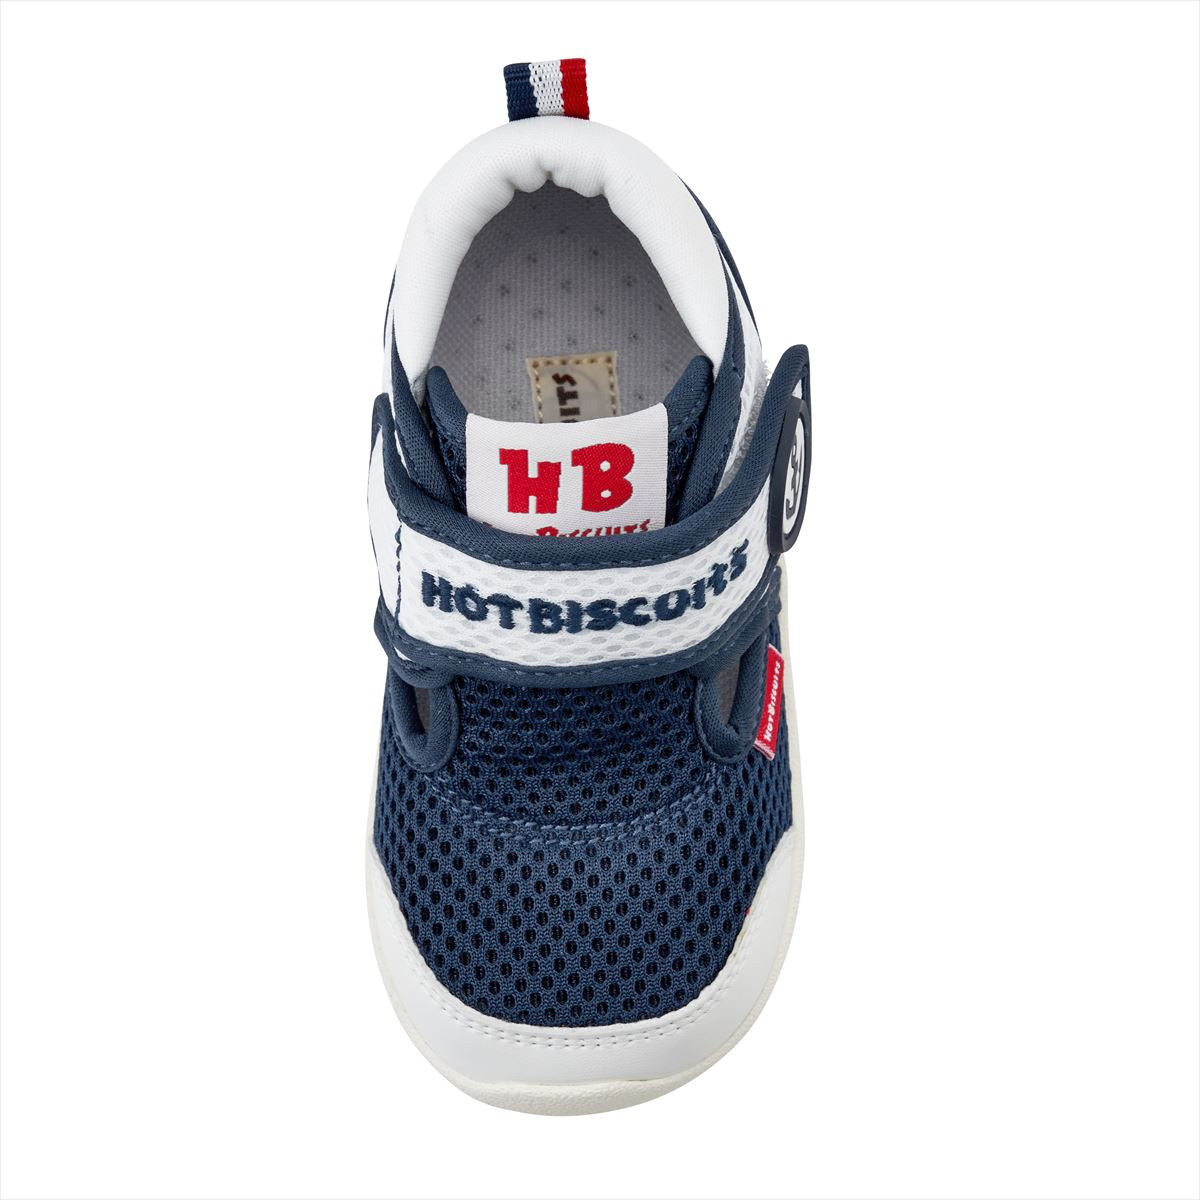 Double Russell Mesh Second Shoes - HB Marine